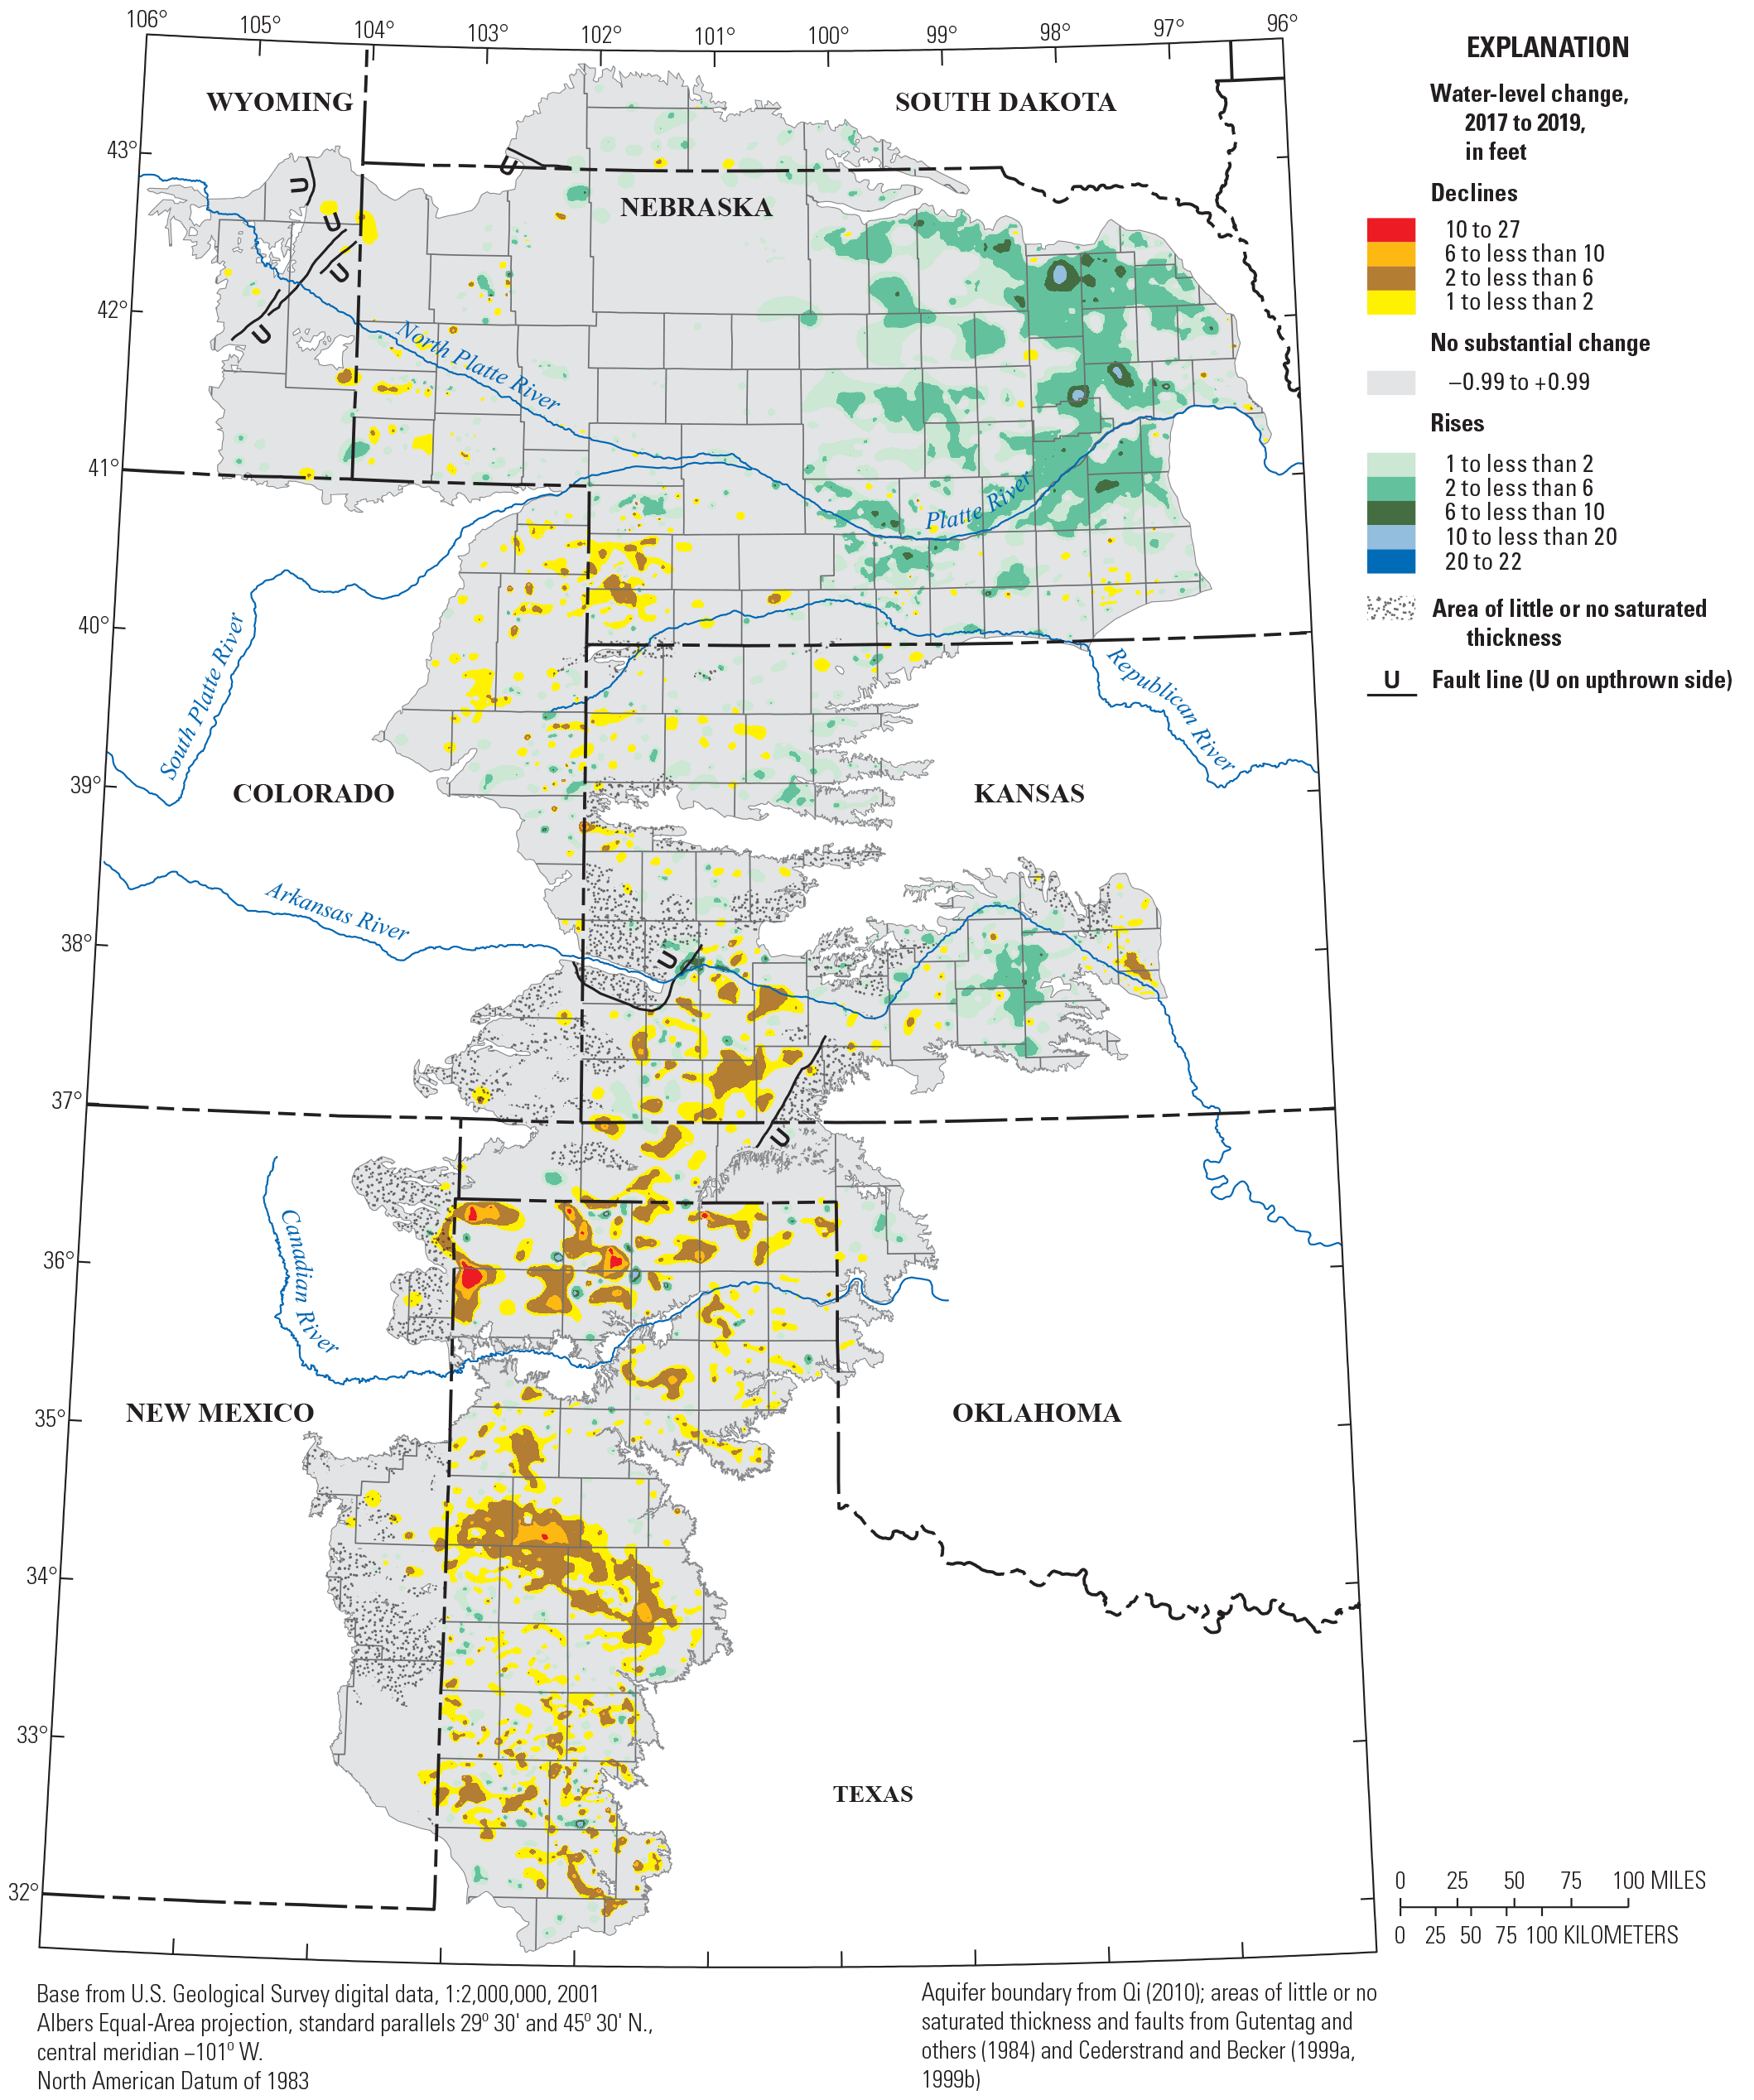 Water-level declines, rises, and areas of no change from 2017 to 2019, High Plains
                        aquifer, in feet.